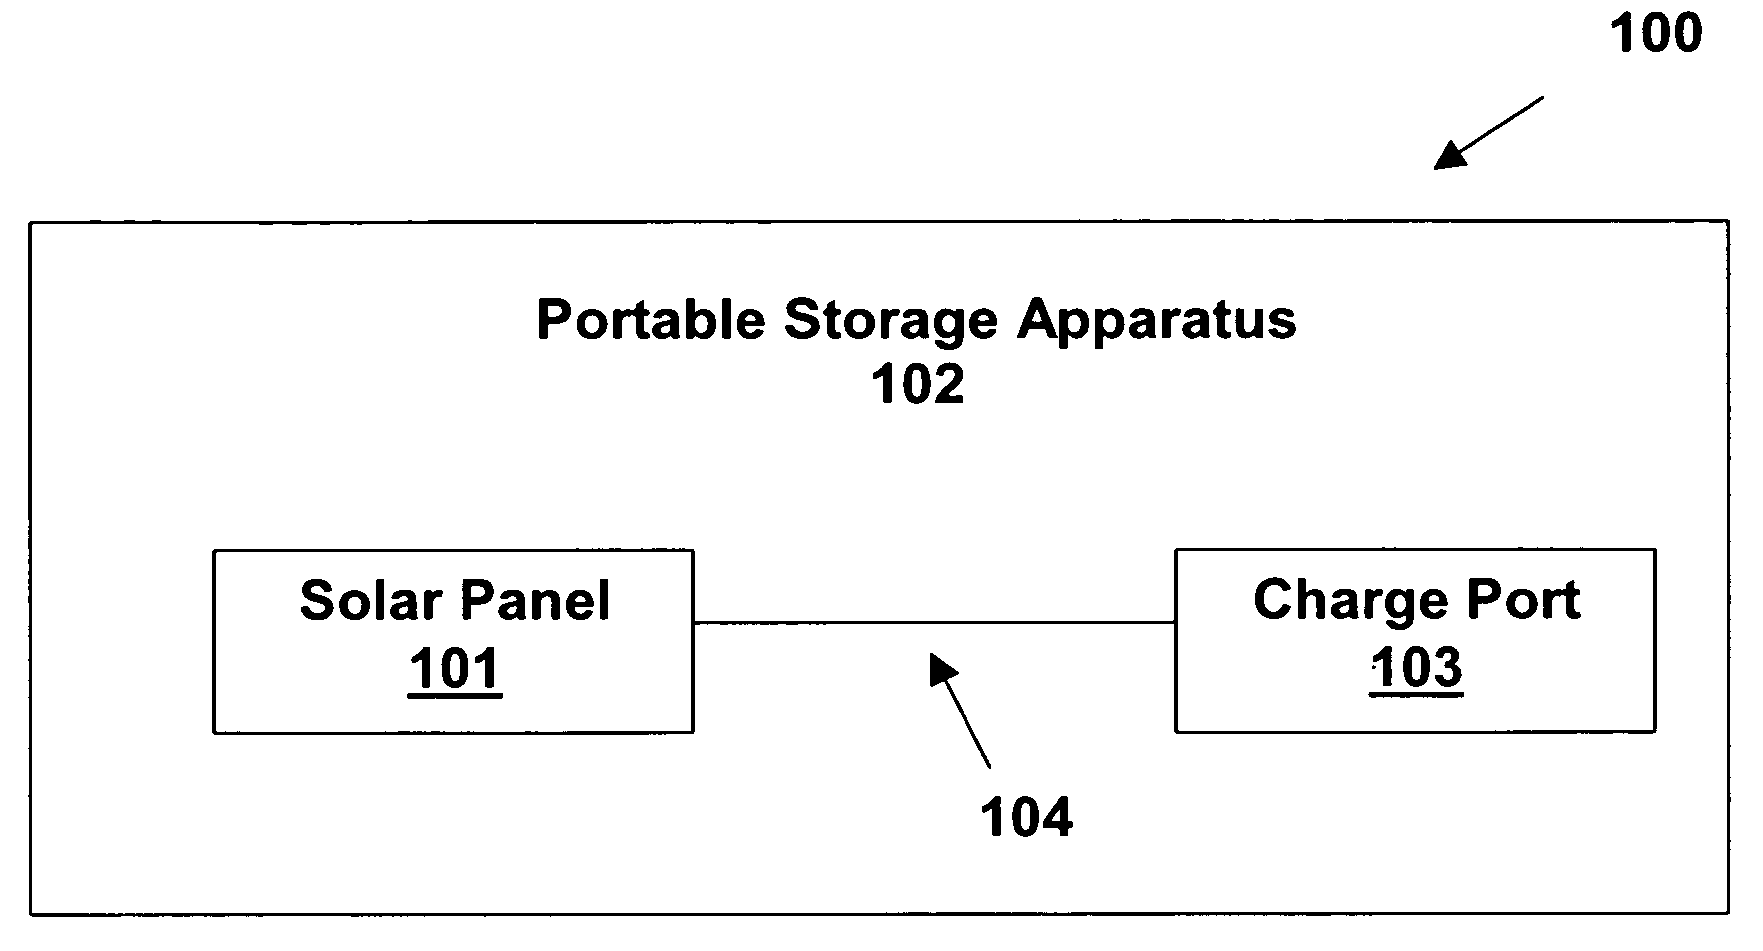 System and apparatus for charging an electronic device using solar energy